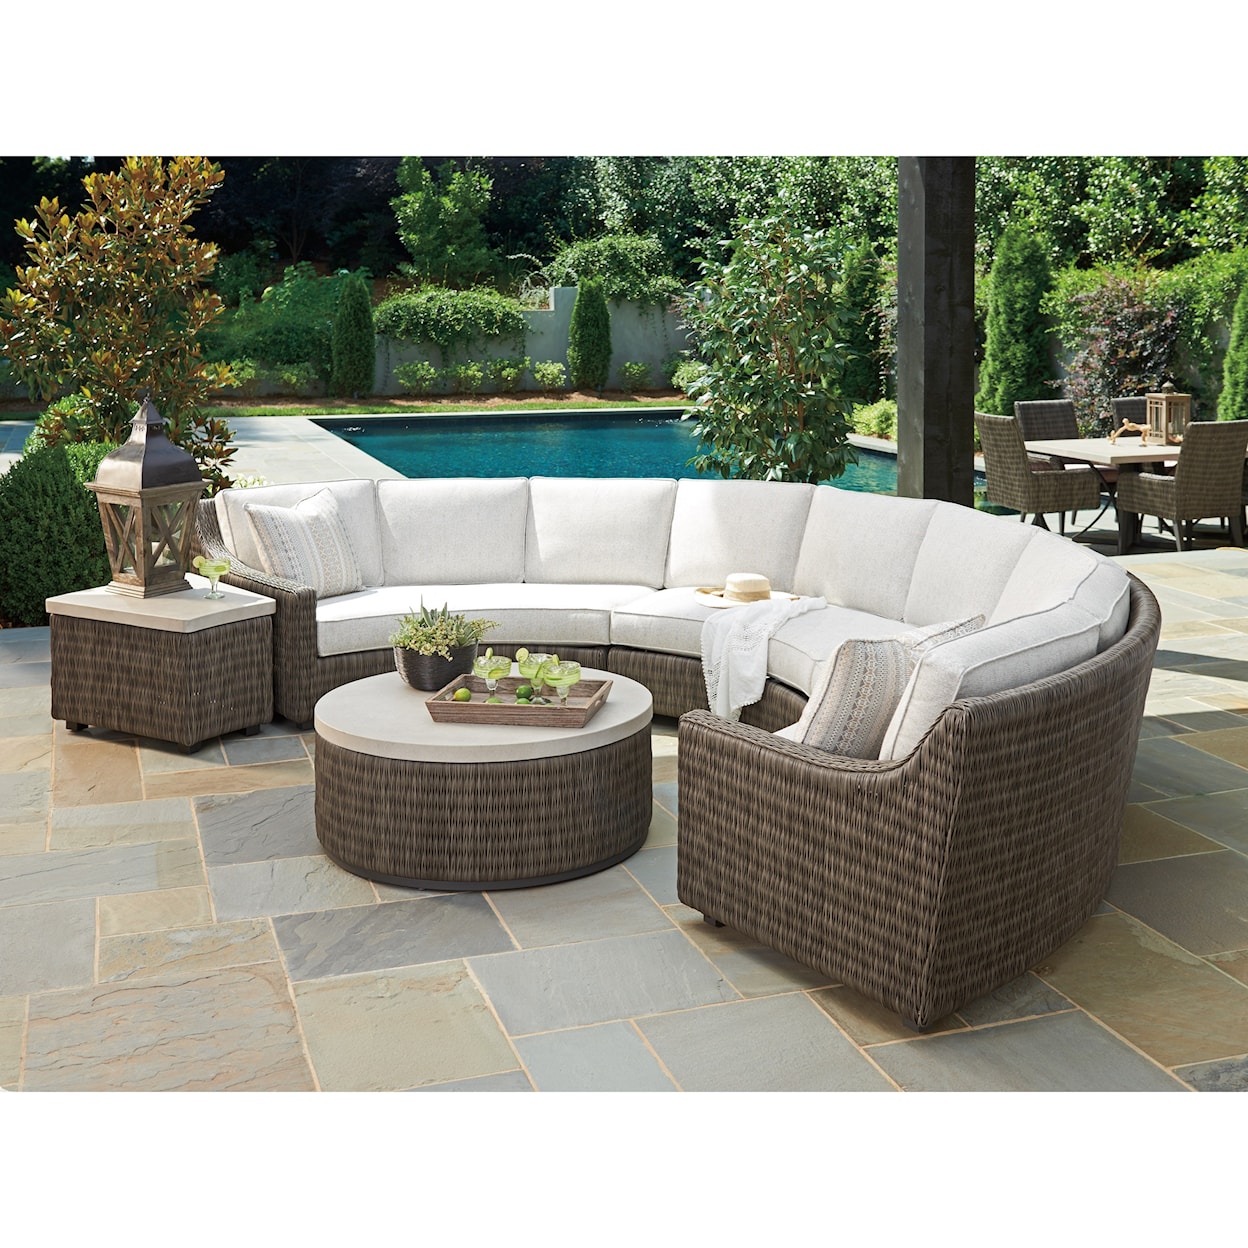 Tommy Bahama Outdoor Living Cypress Point Ocean Terrace Outdoor Sectional Sofa Chat Set